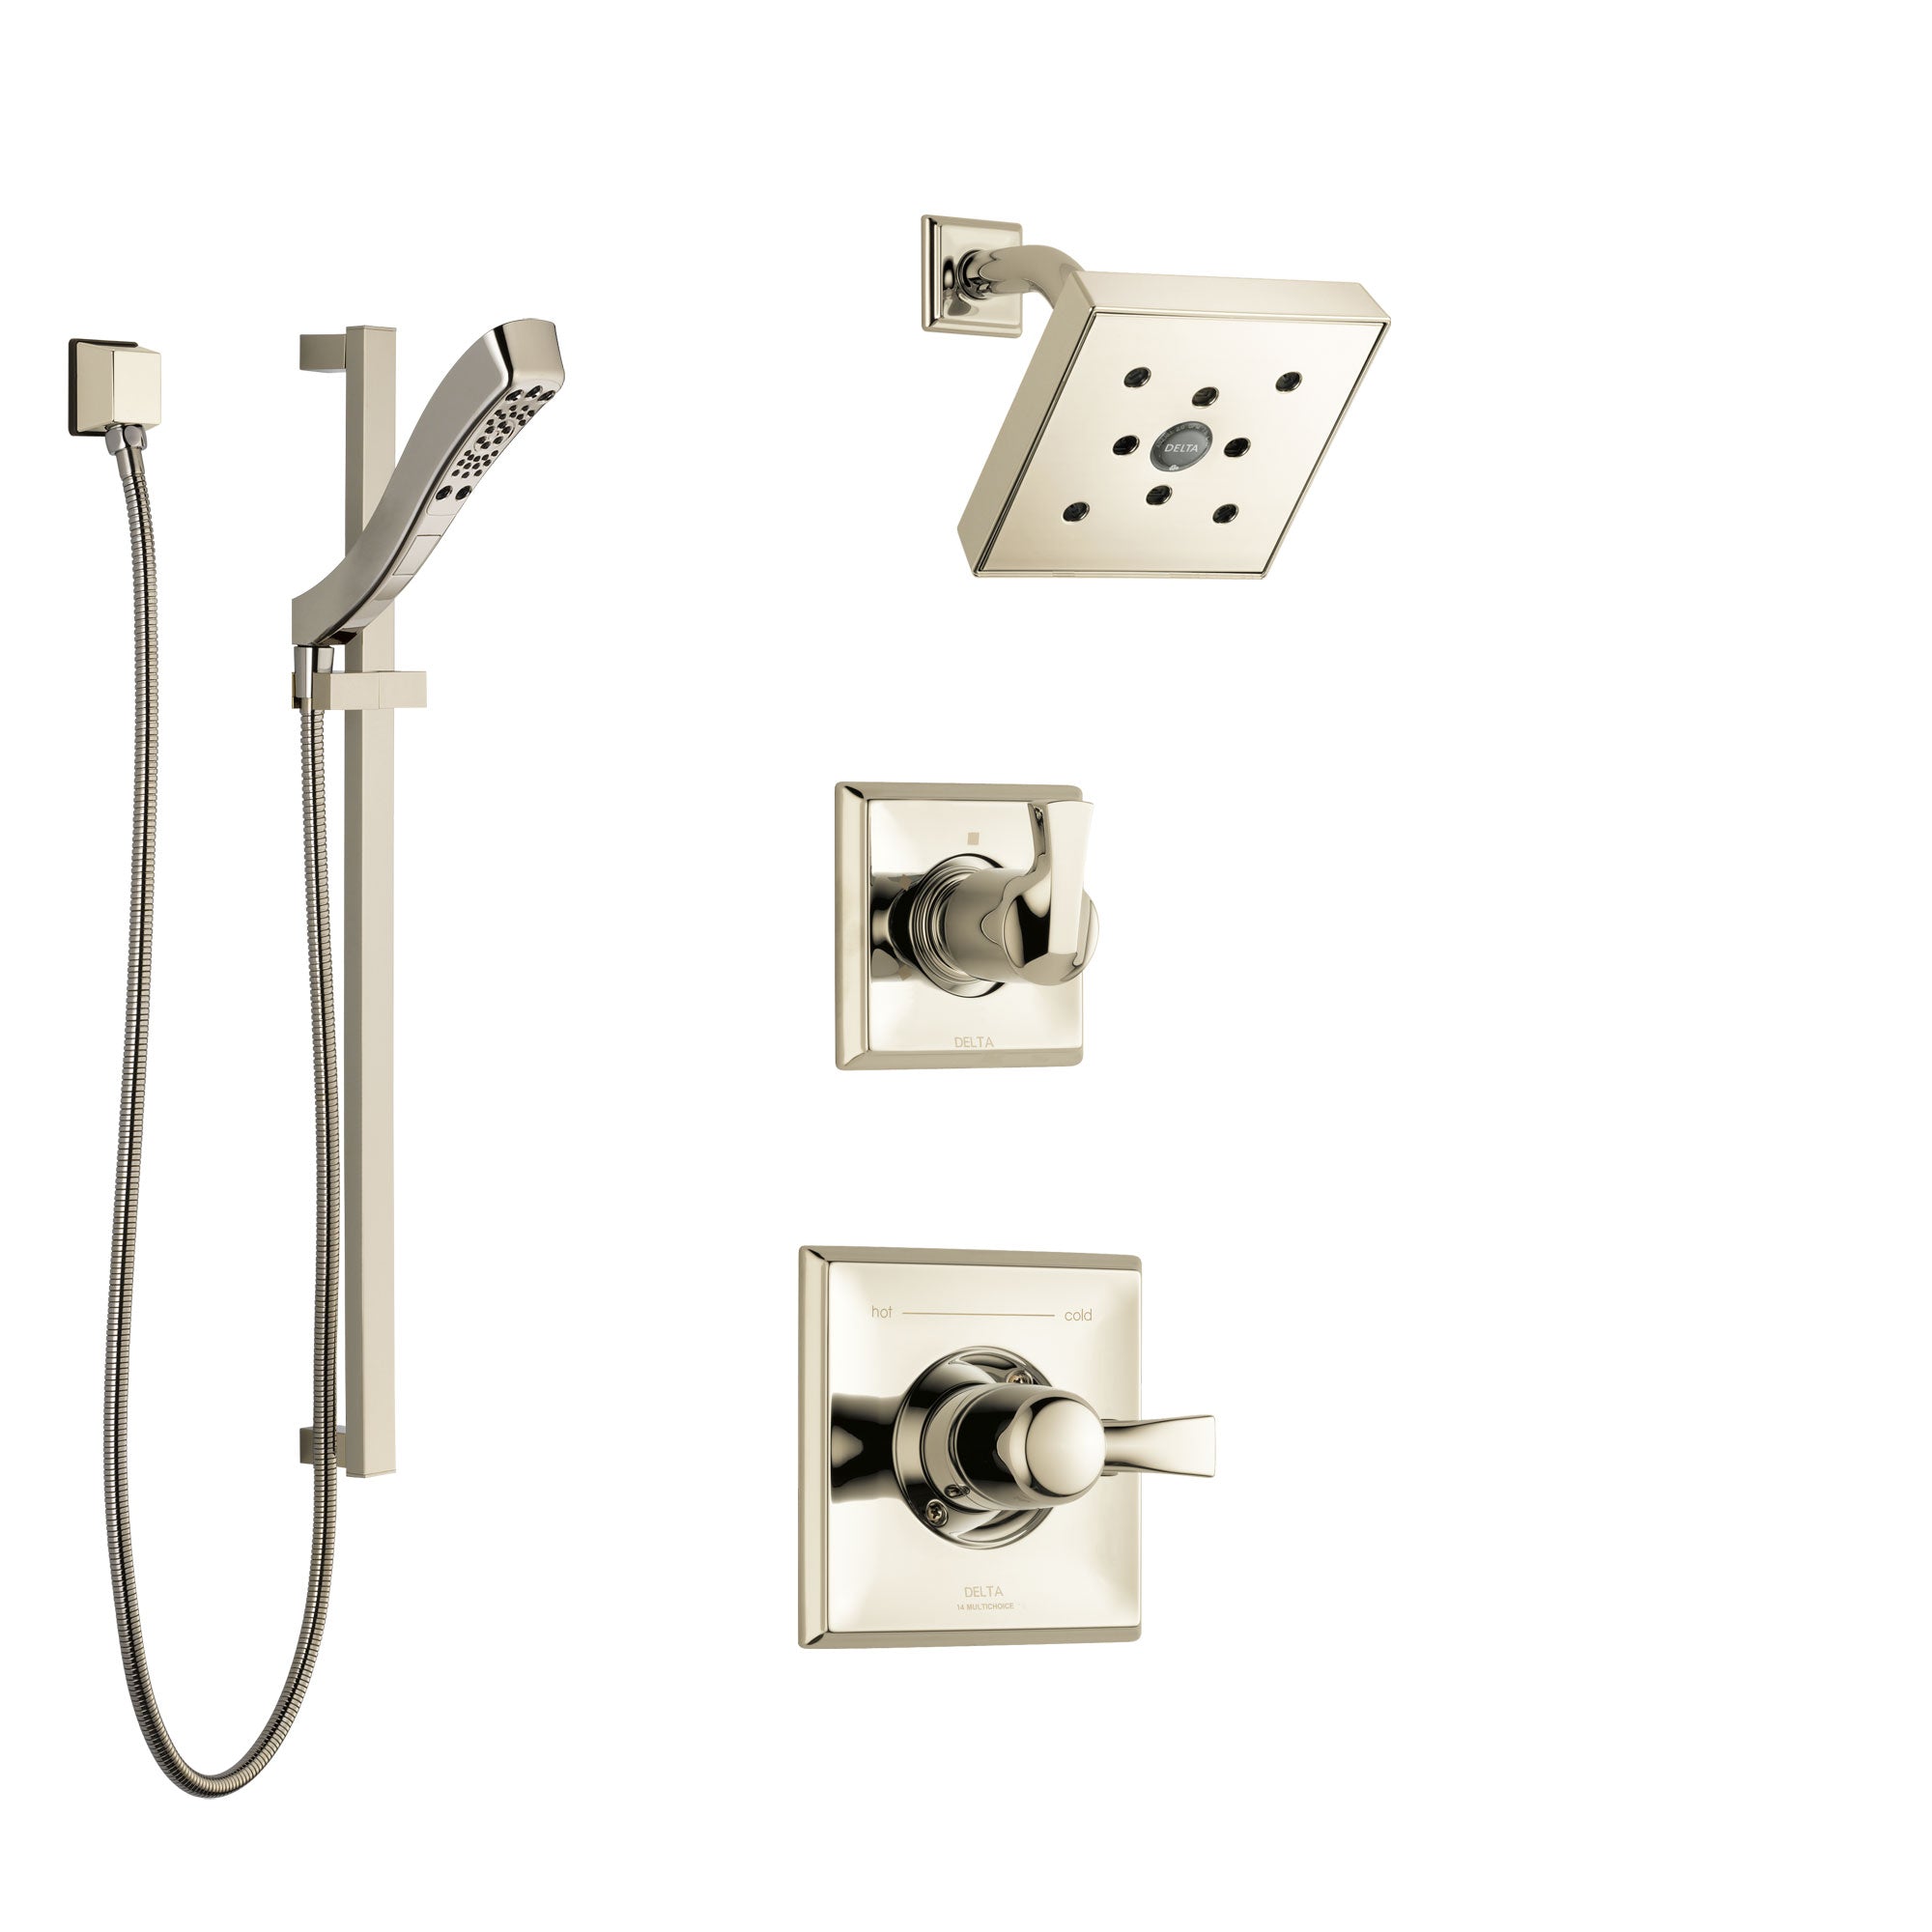 Delta Dryden Polished Nickel Finish Shower System with Control Handle, 3-Setting Diverter, Showerhead, and Hand Shower with Slidebar SS142512PN3